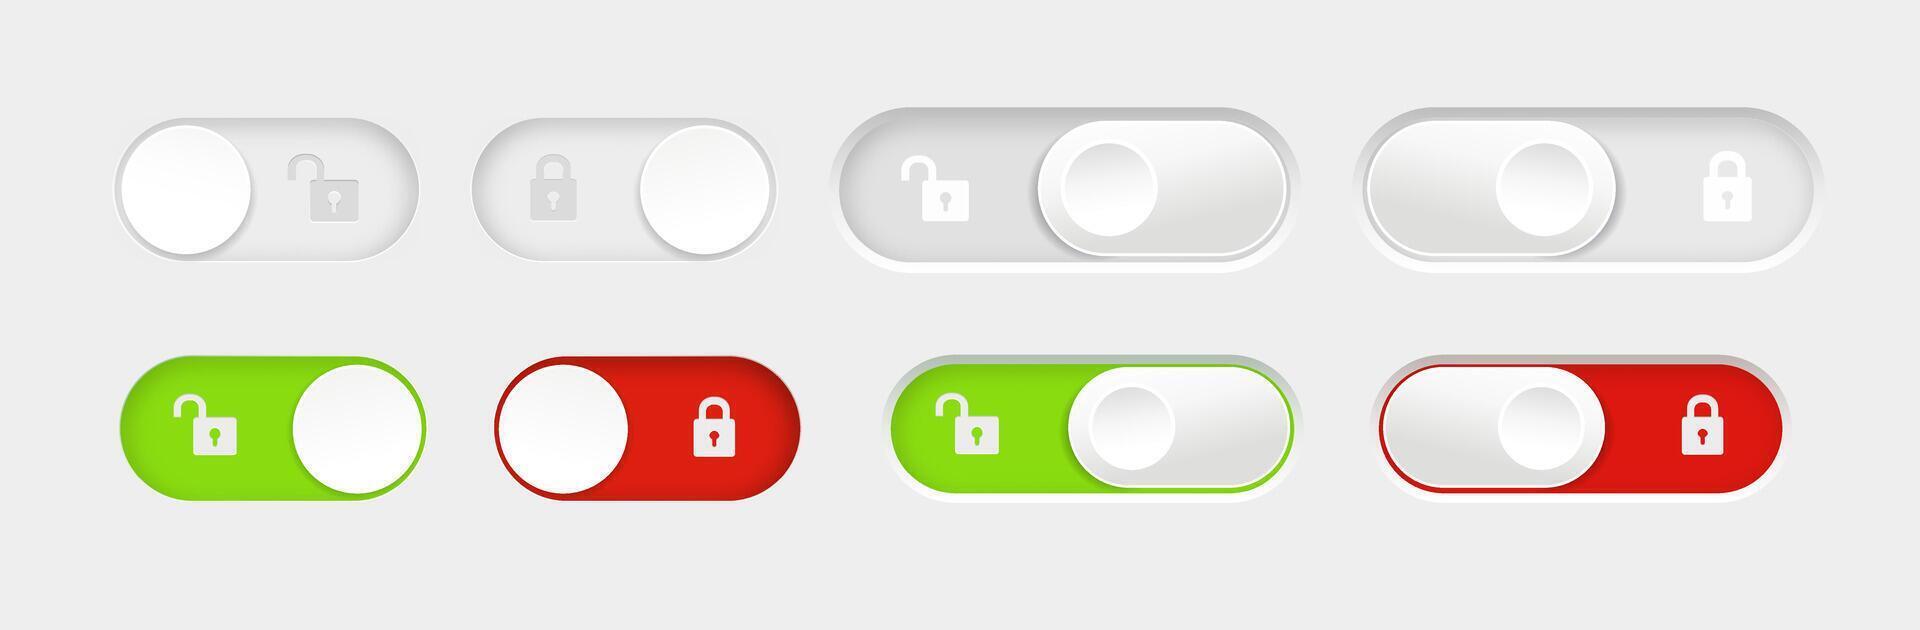 blocked and unlocked toggle switch vector